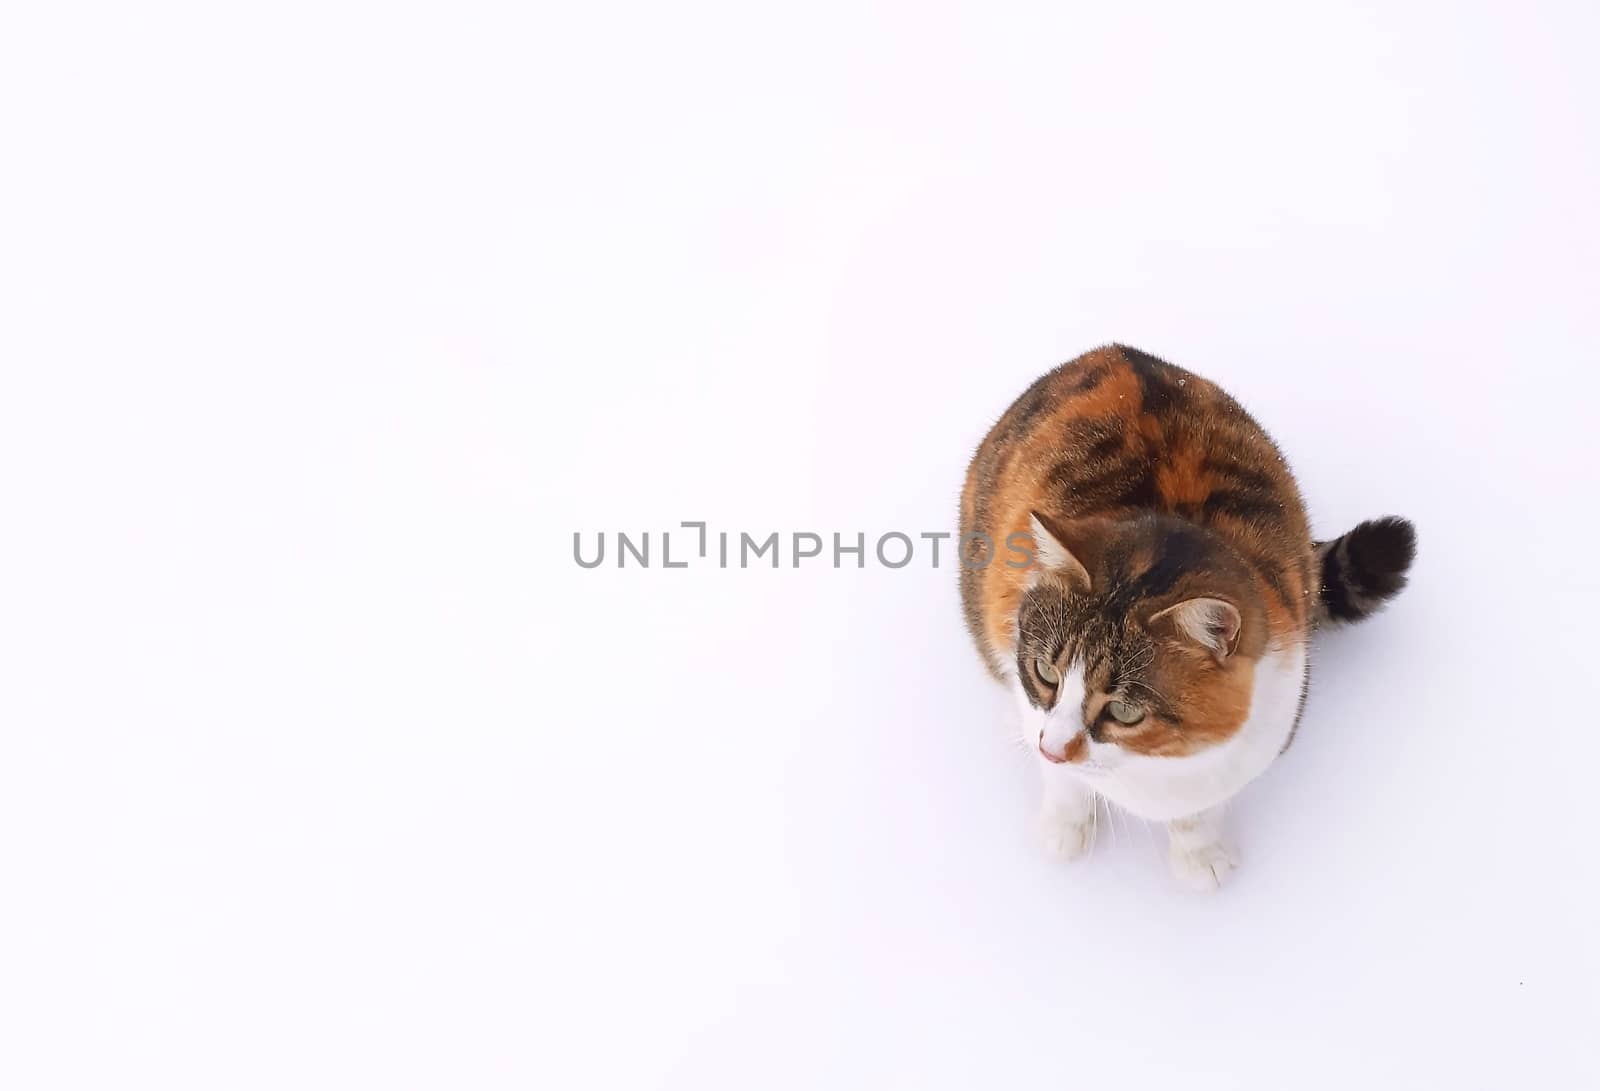 A beautiful cat on a white background by Mindru